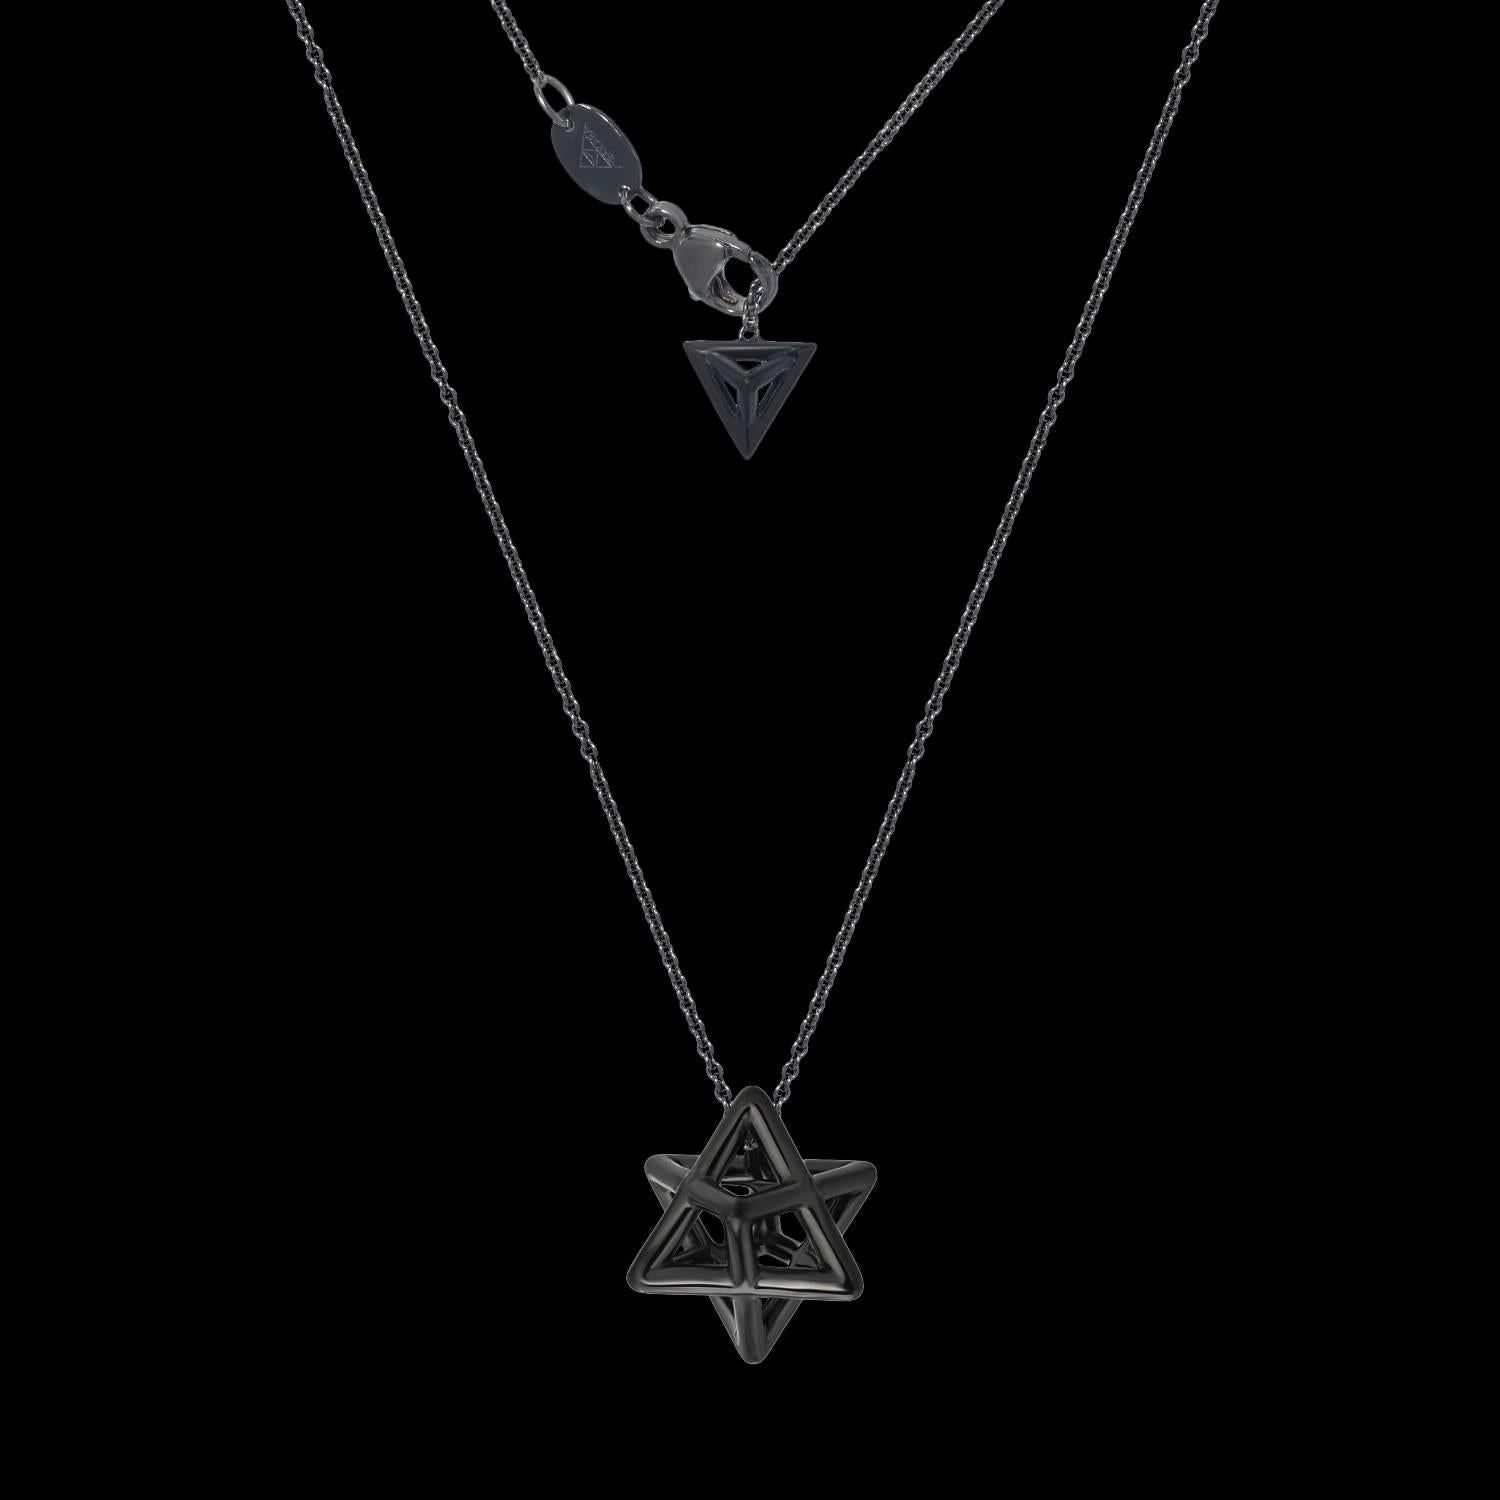 Merkaba black-finished, unisex, platinum necklace, is a heirloom-quality, sacred geometric jewelry piece, highlighting superb attention to detail and extraordinary polish, symmetry and equilibrium. It suspends elegantly at the chest, measuring 0.68